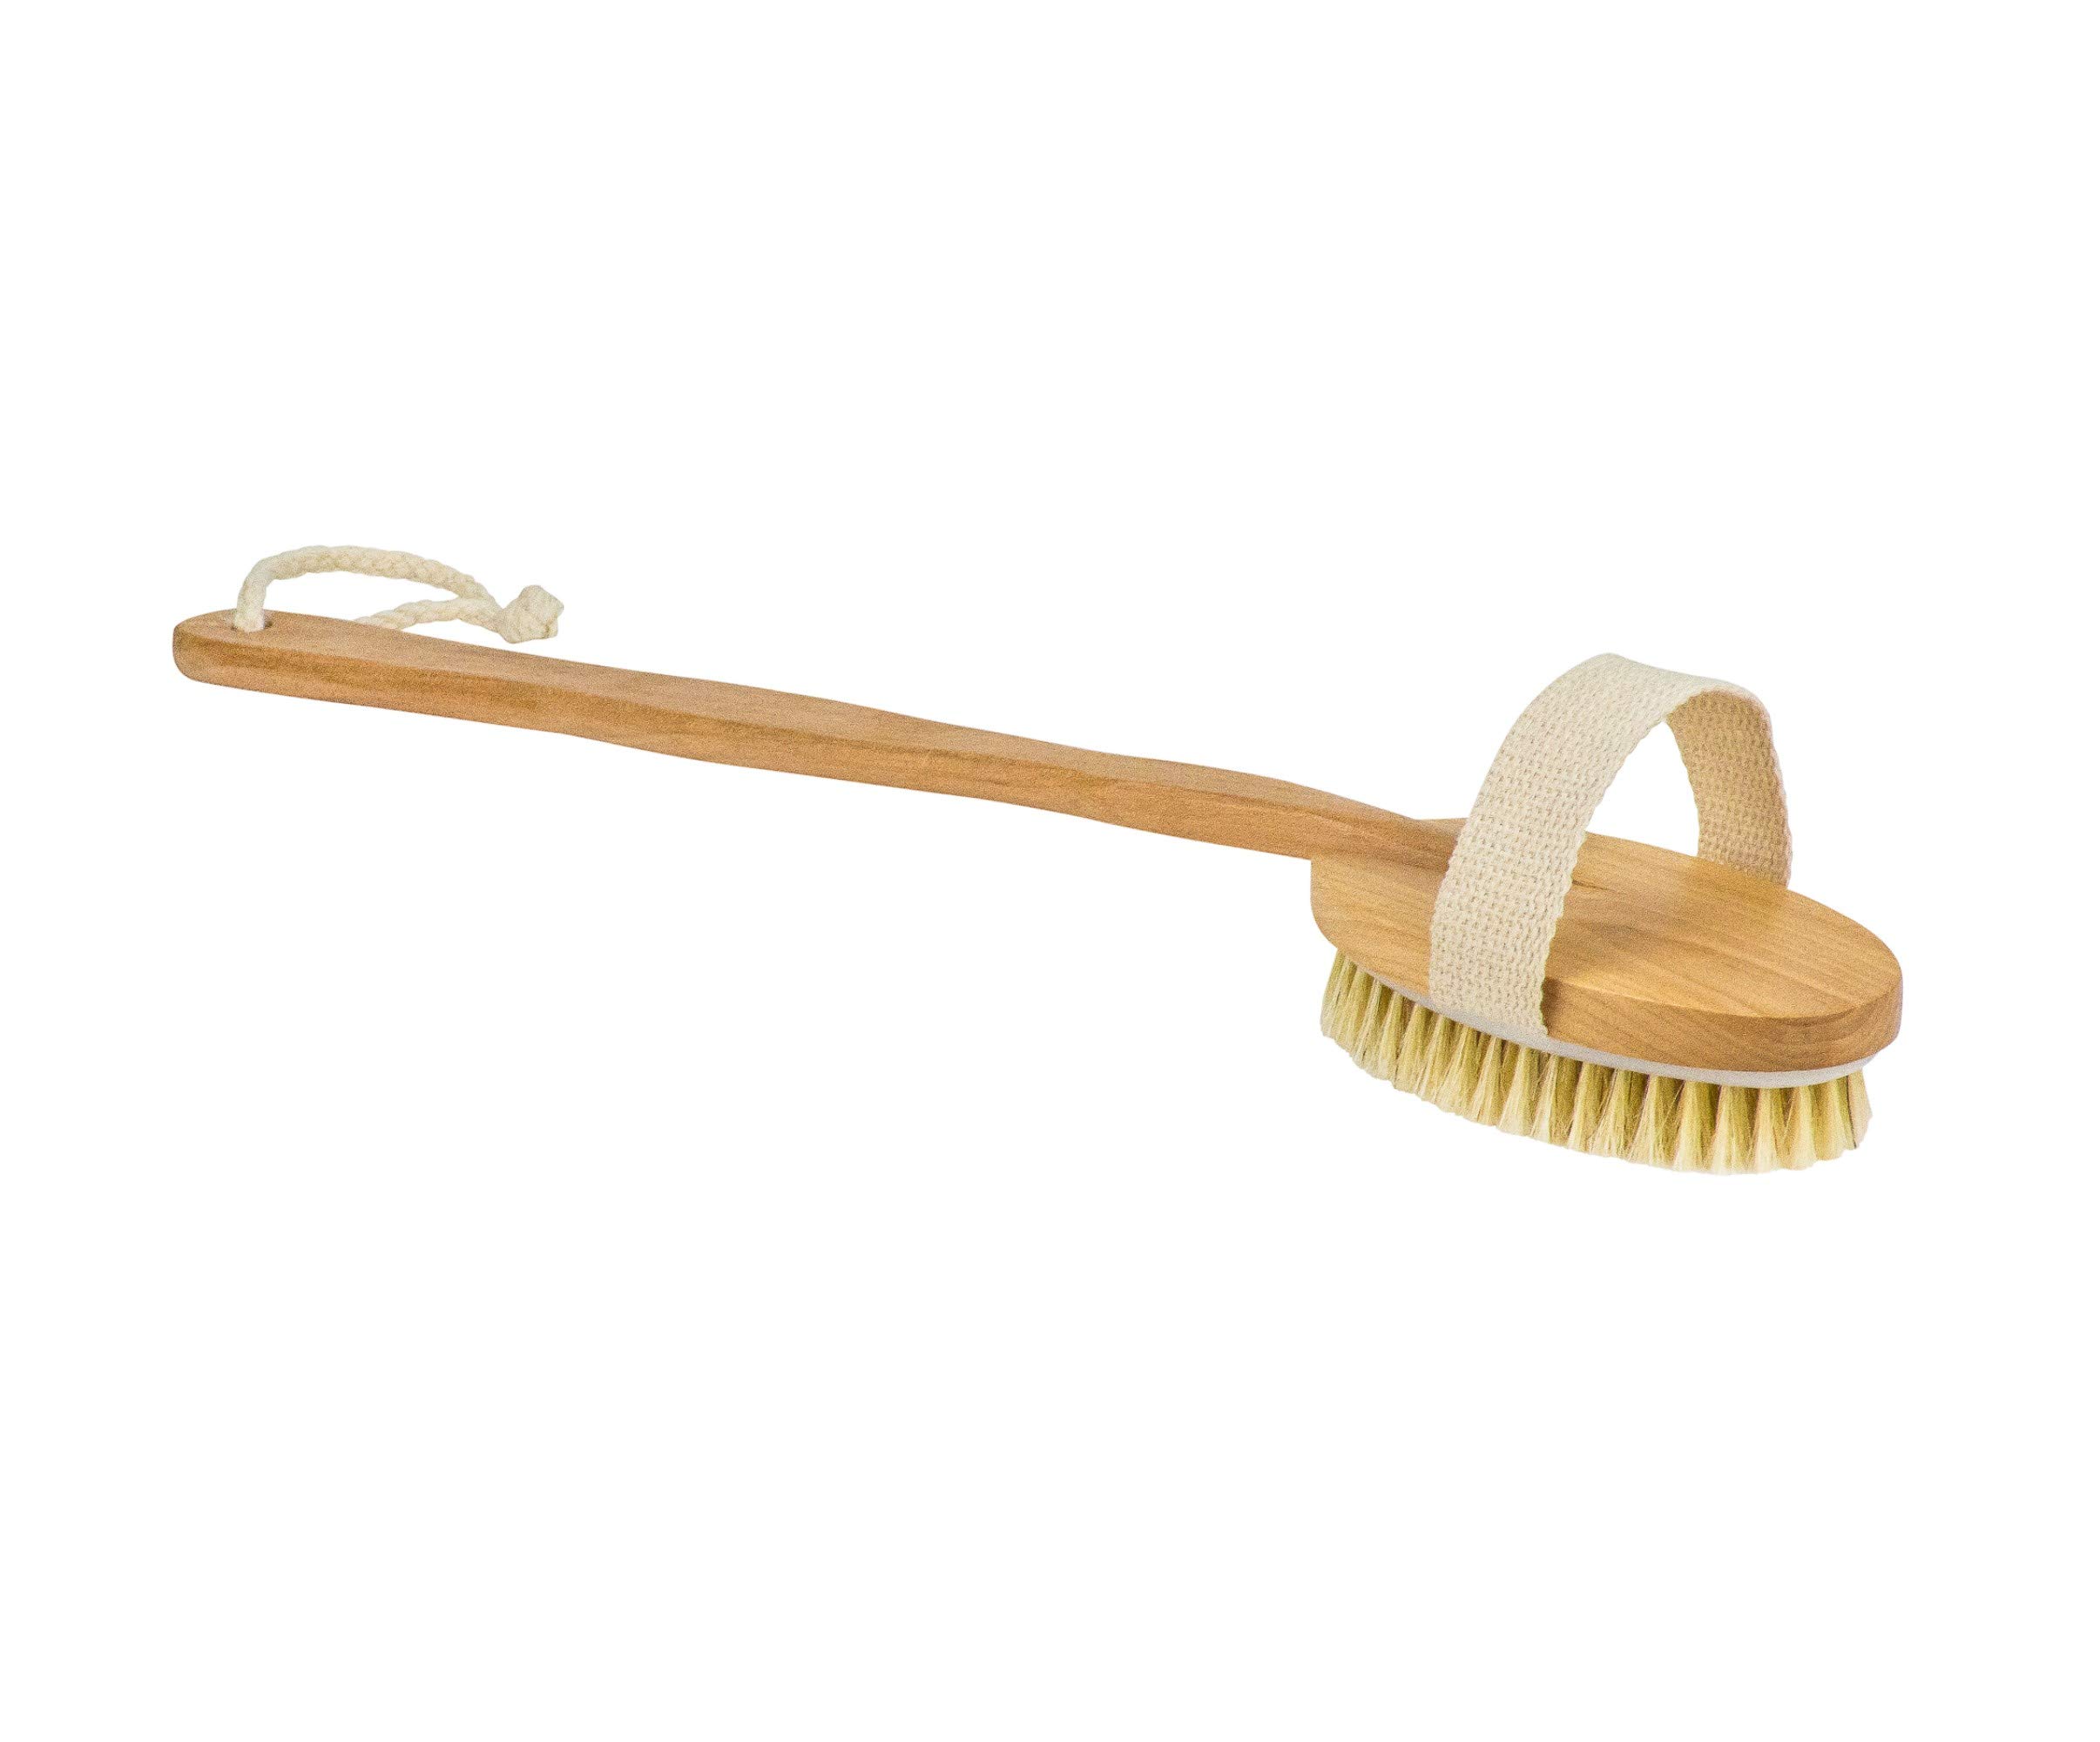 Bath Body Brush Long Handle Wooden Shower Brush with Natural Bristles